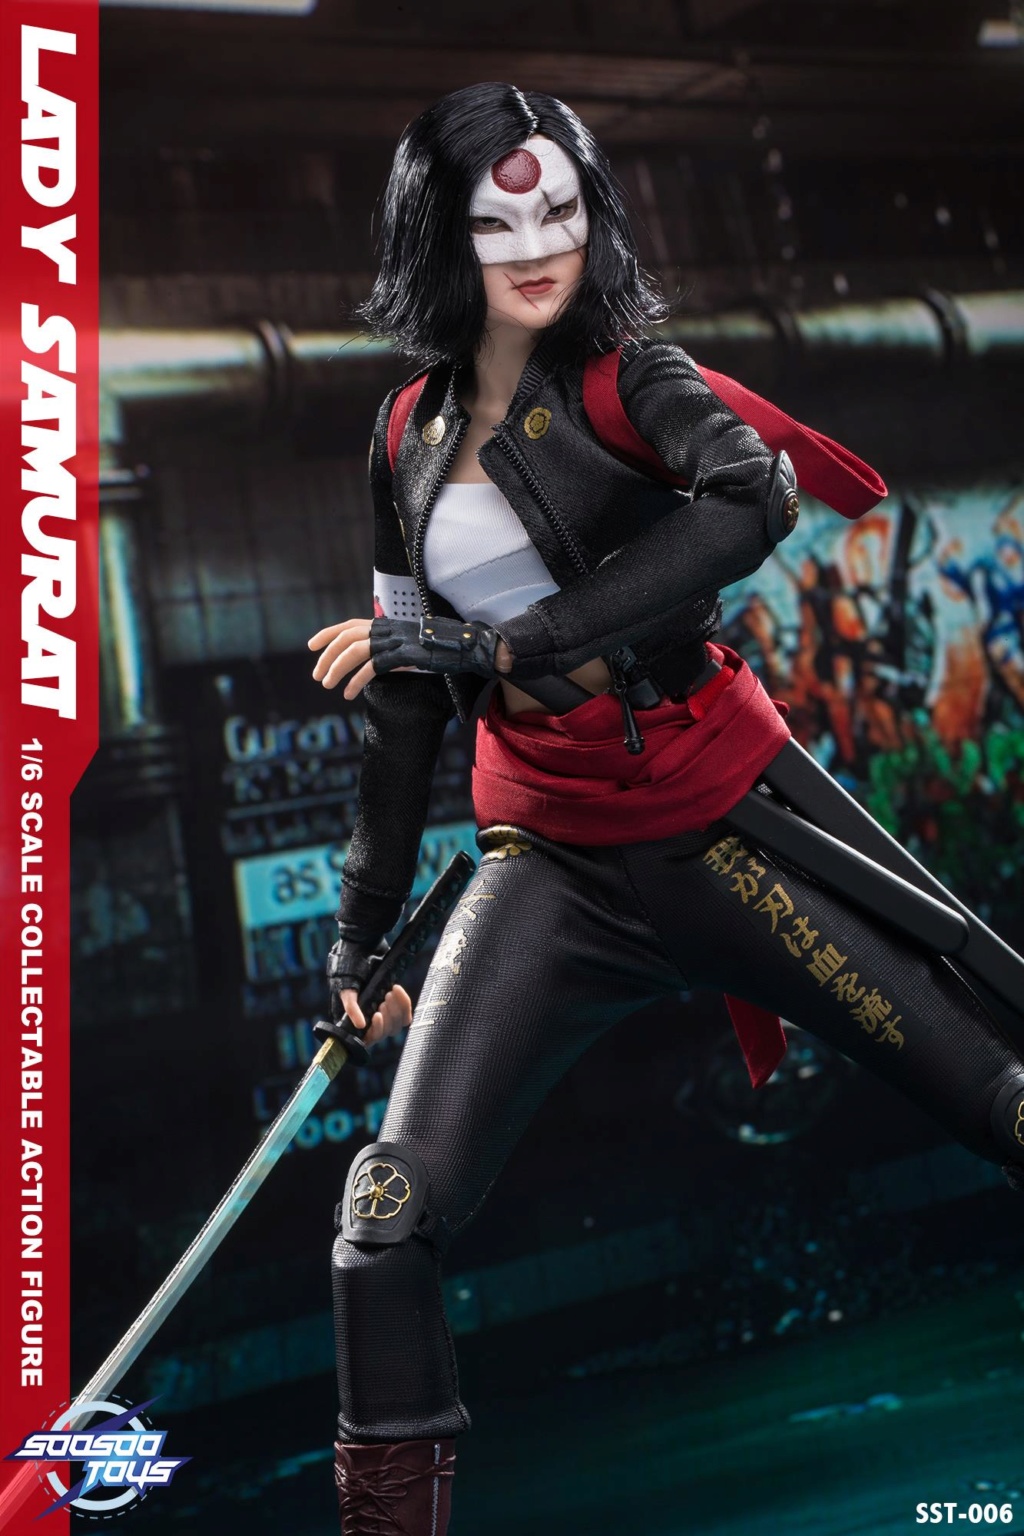 Suicide - NEW PRODUCT: Soosootoys 1/6 scale collectible SST-006 Lady Samurai 5150